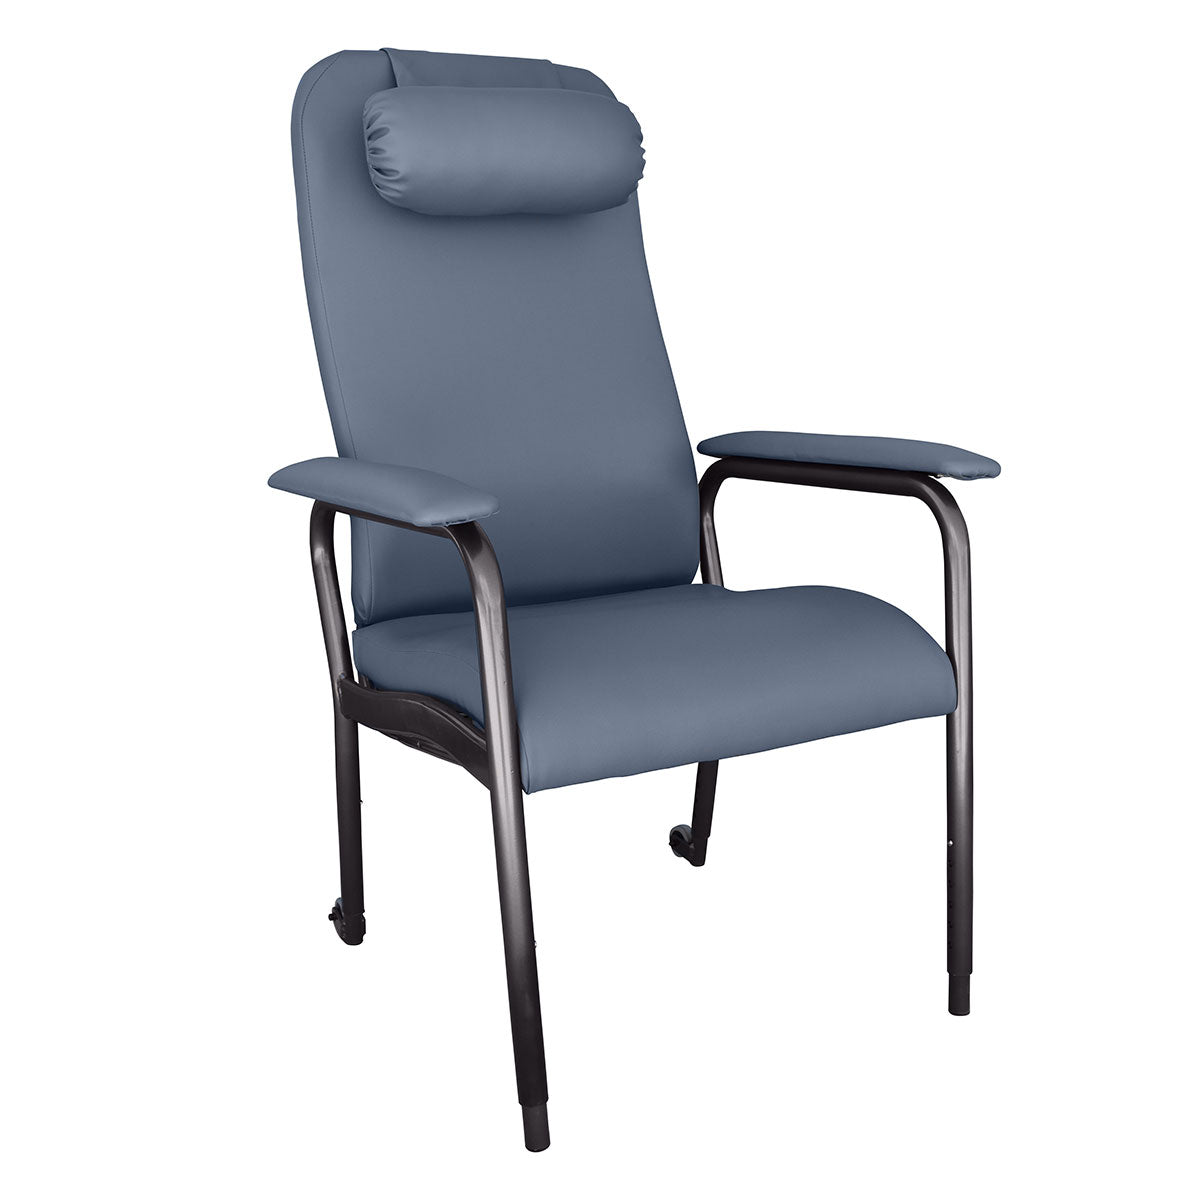 K Care Fusion Comfort Chair